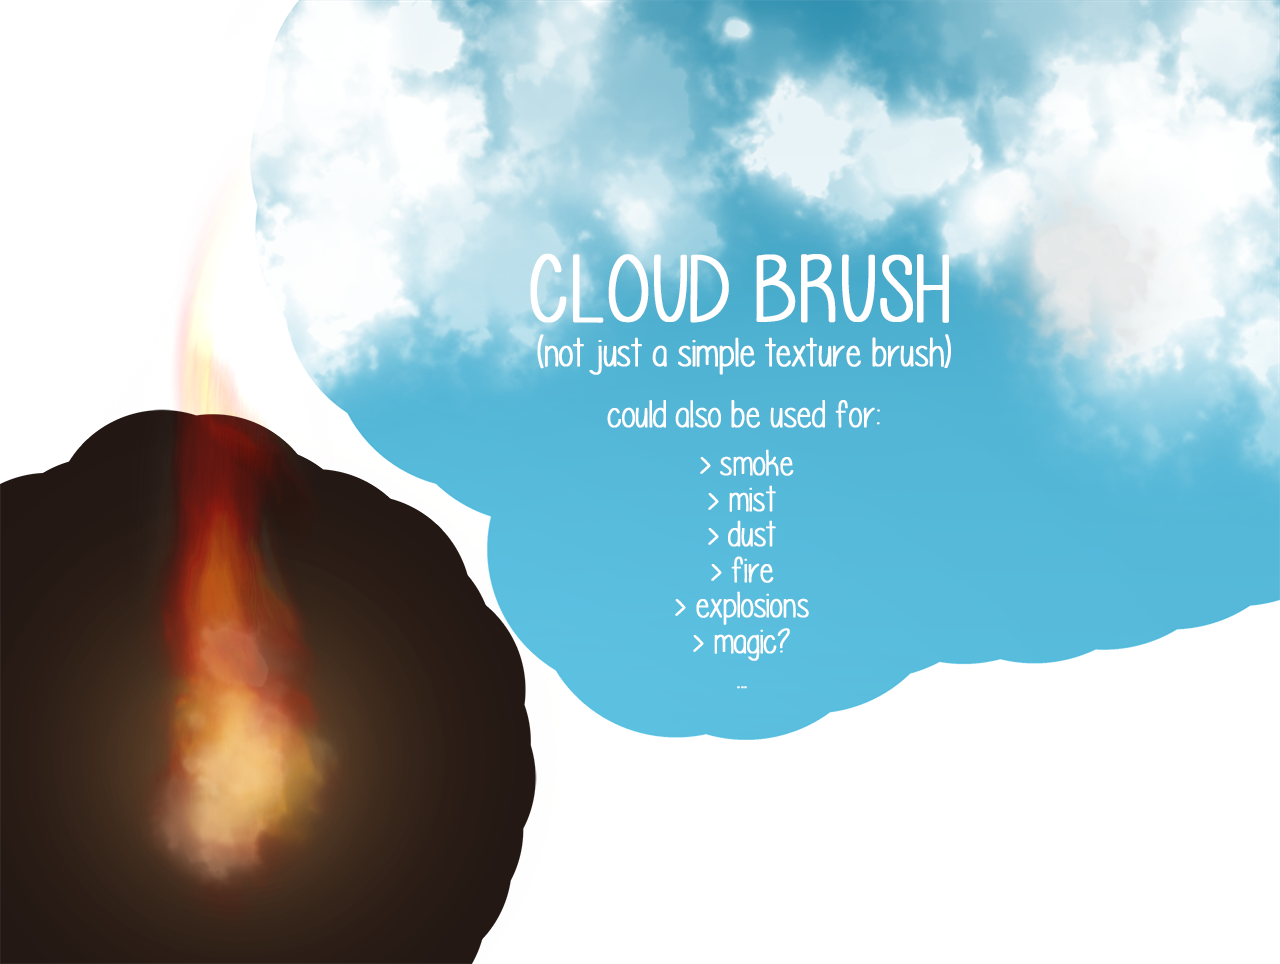 Cloud BrushSo this is a brushsetting in photoshop that makes awesome clouds, and